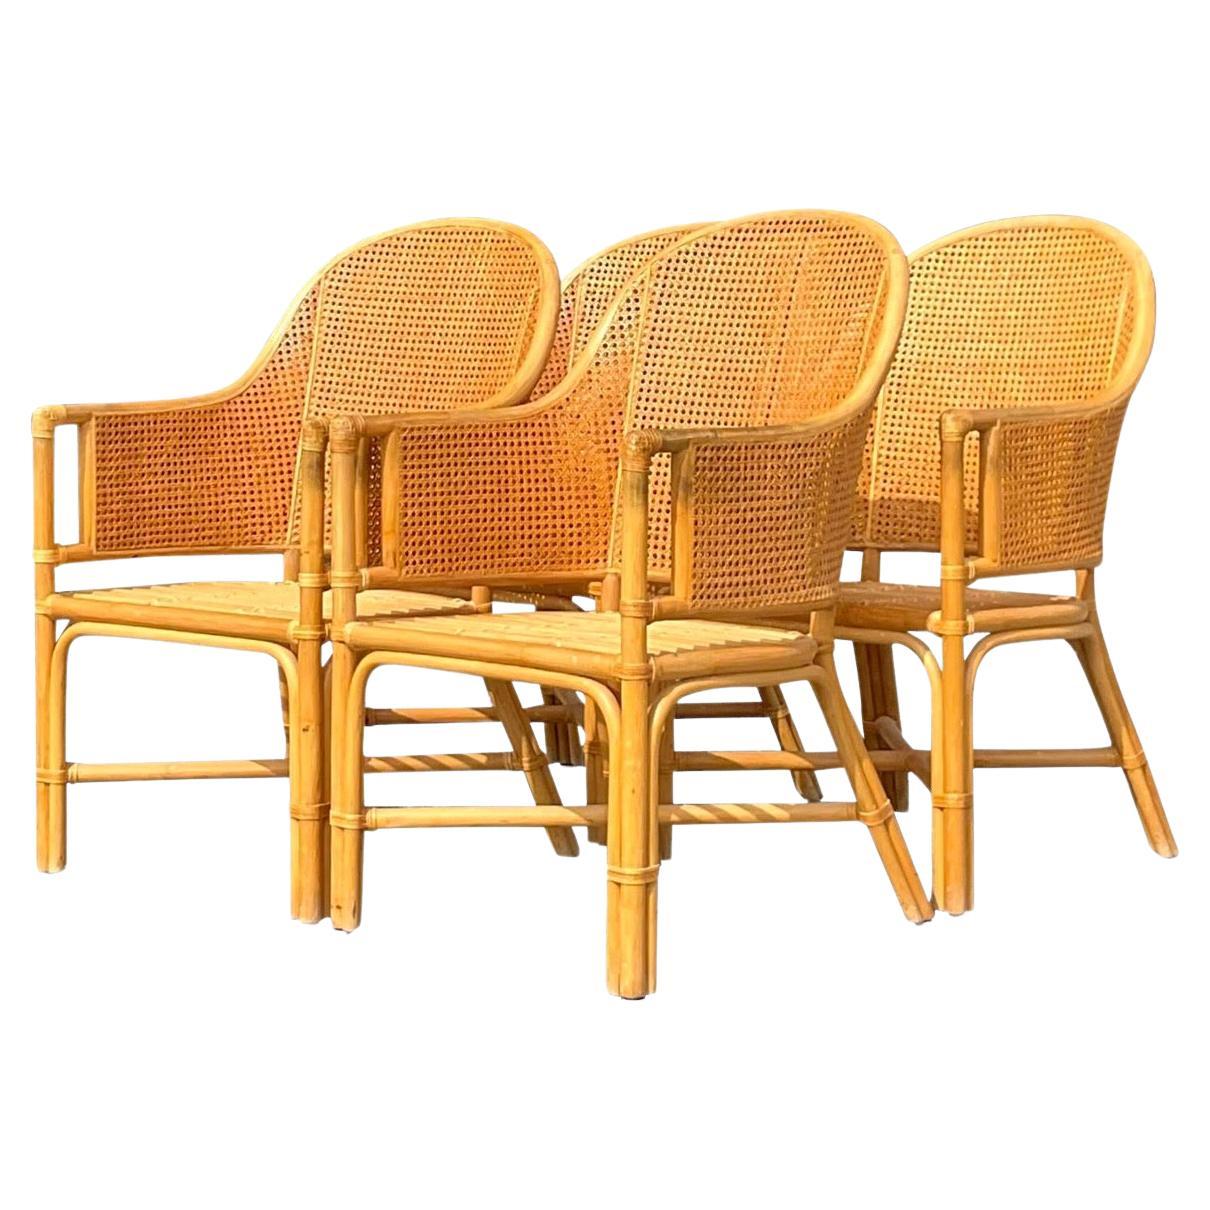 Vintage Coastal Cane Rattan Dining Chairs After McGuire - Set of 4 For Sale